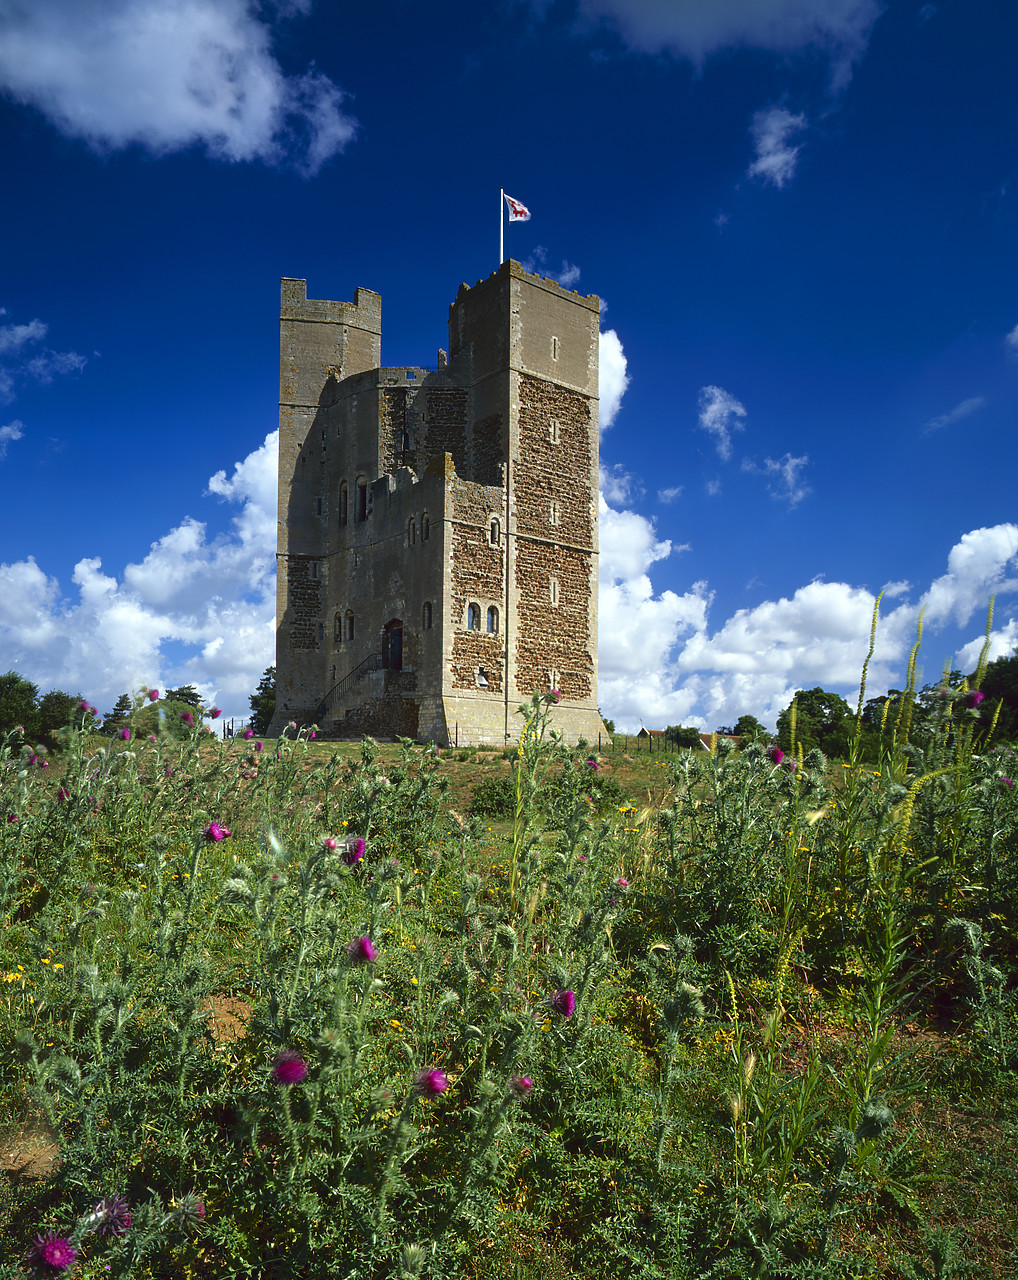 #040189-3 - Orford Castle, Orford, Suffolk, England